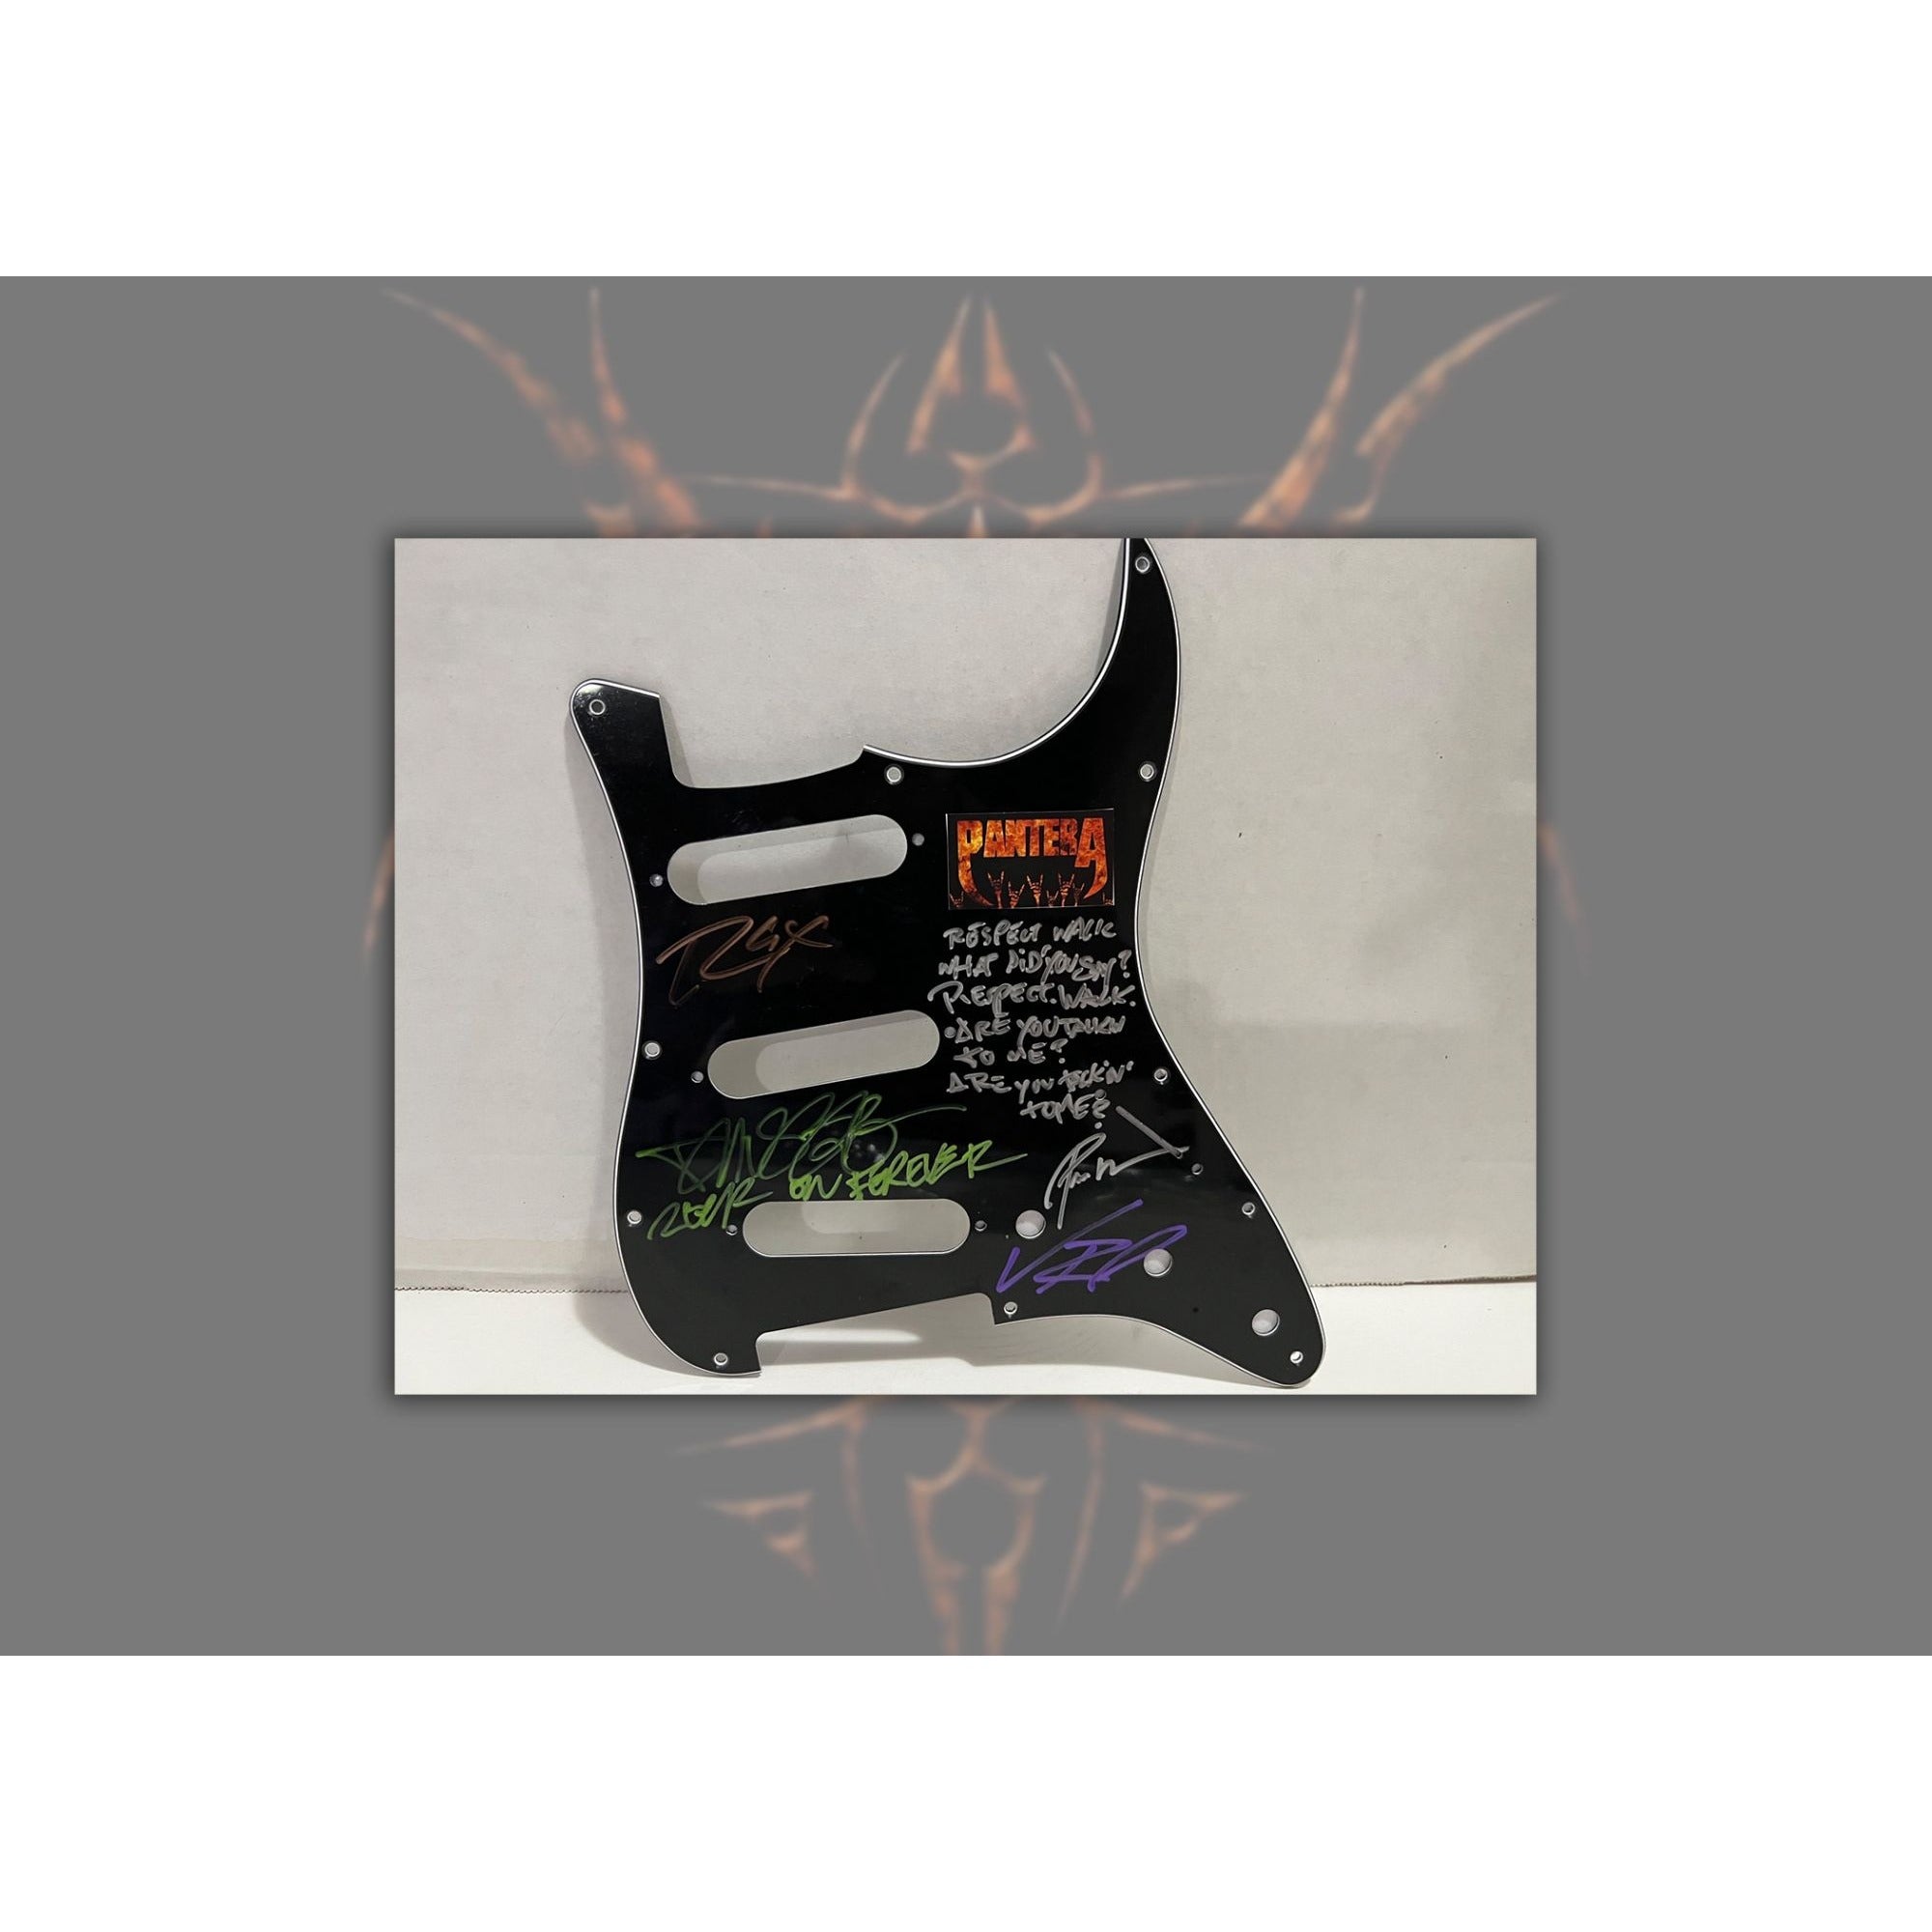 Pantera electric guitar pickguard Dimebag Darrell Abbott, Vinnie Paul, Rex Brown and Phil Anselmo signed with proof